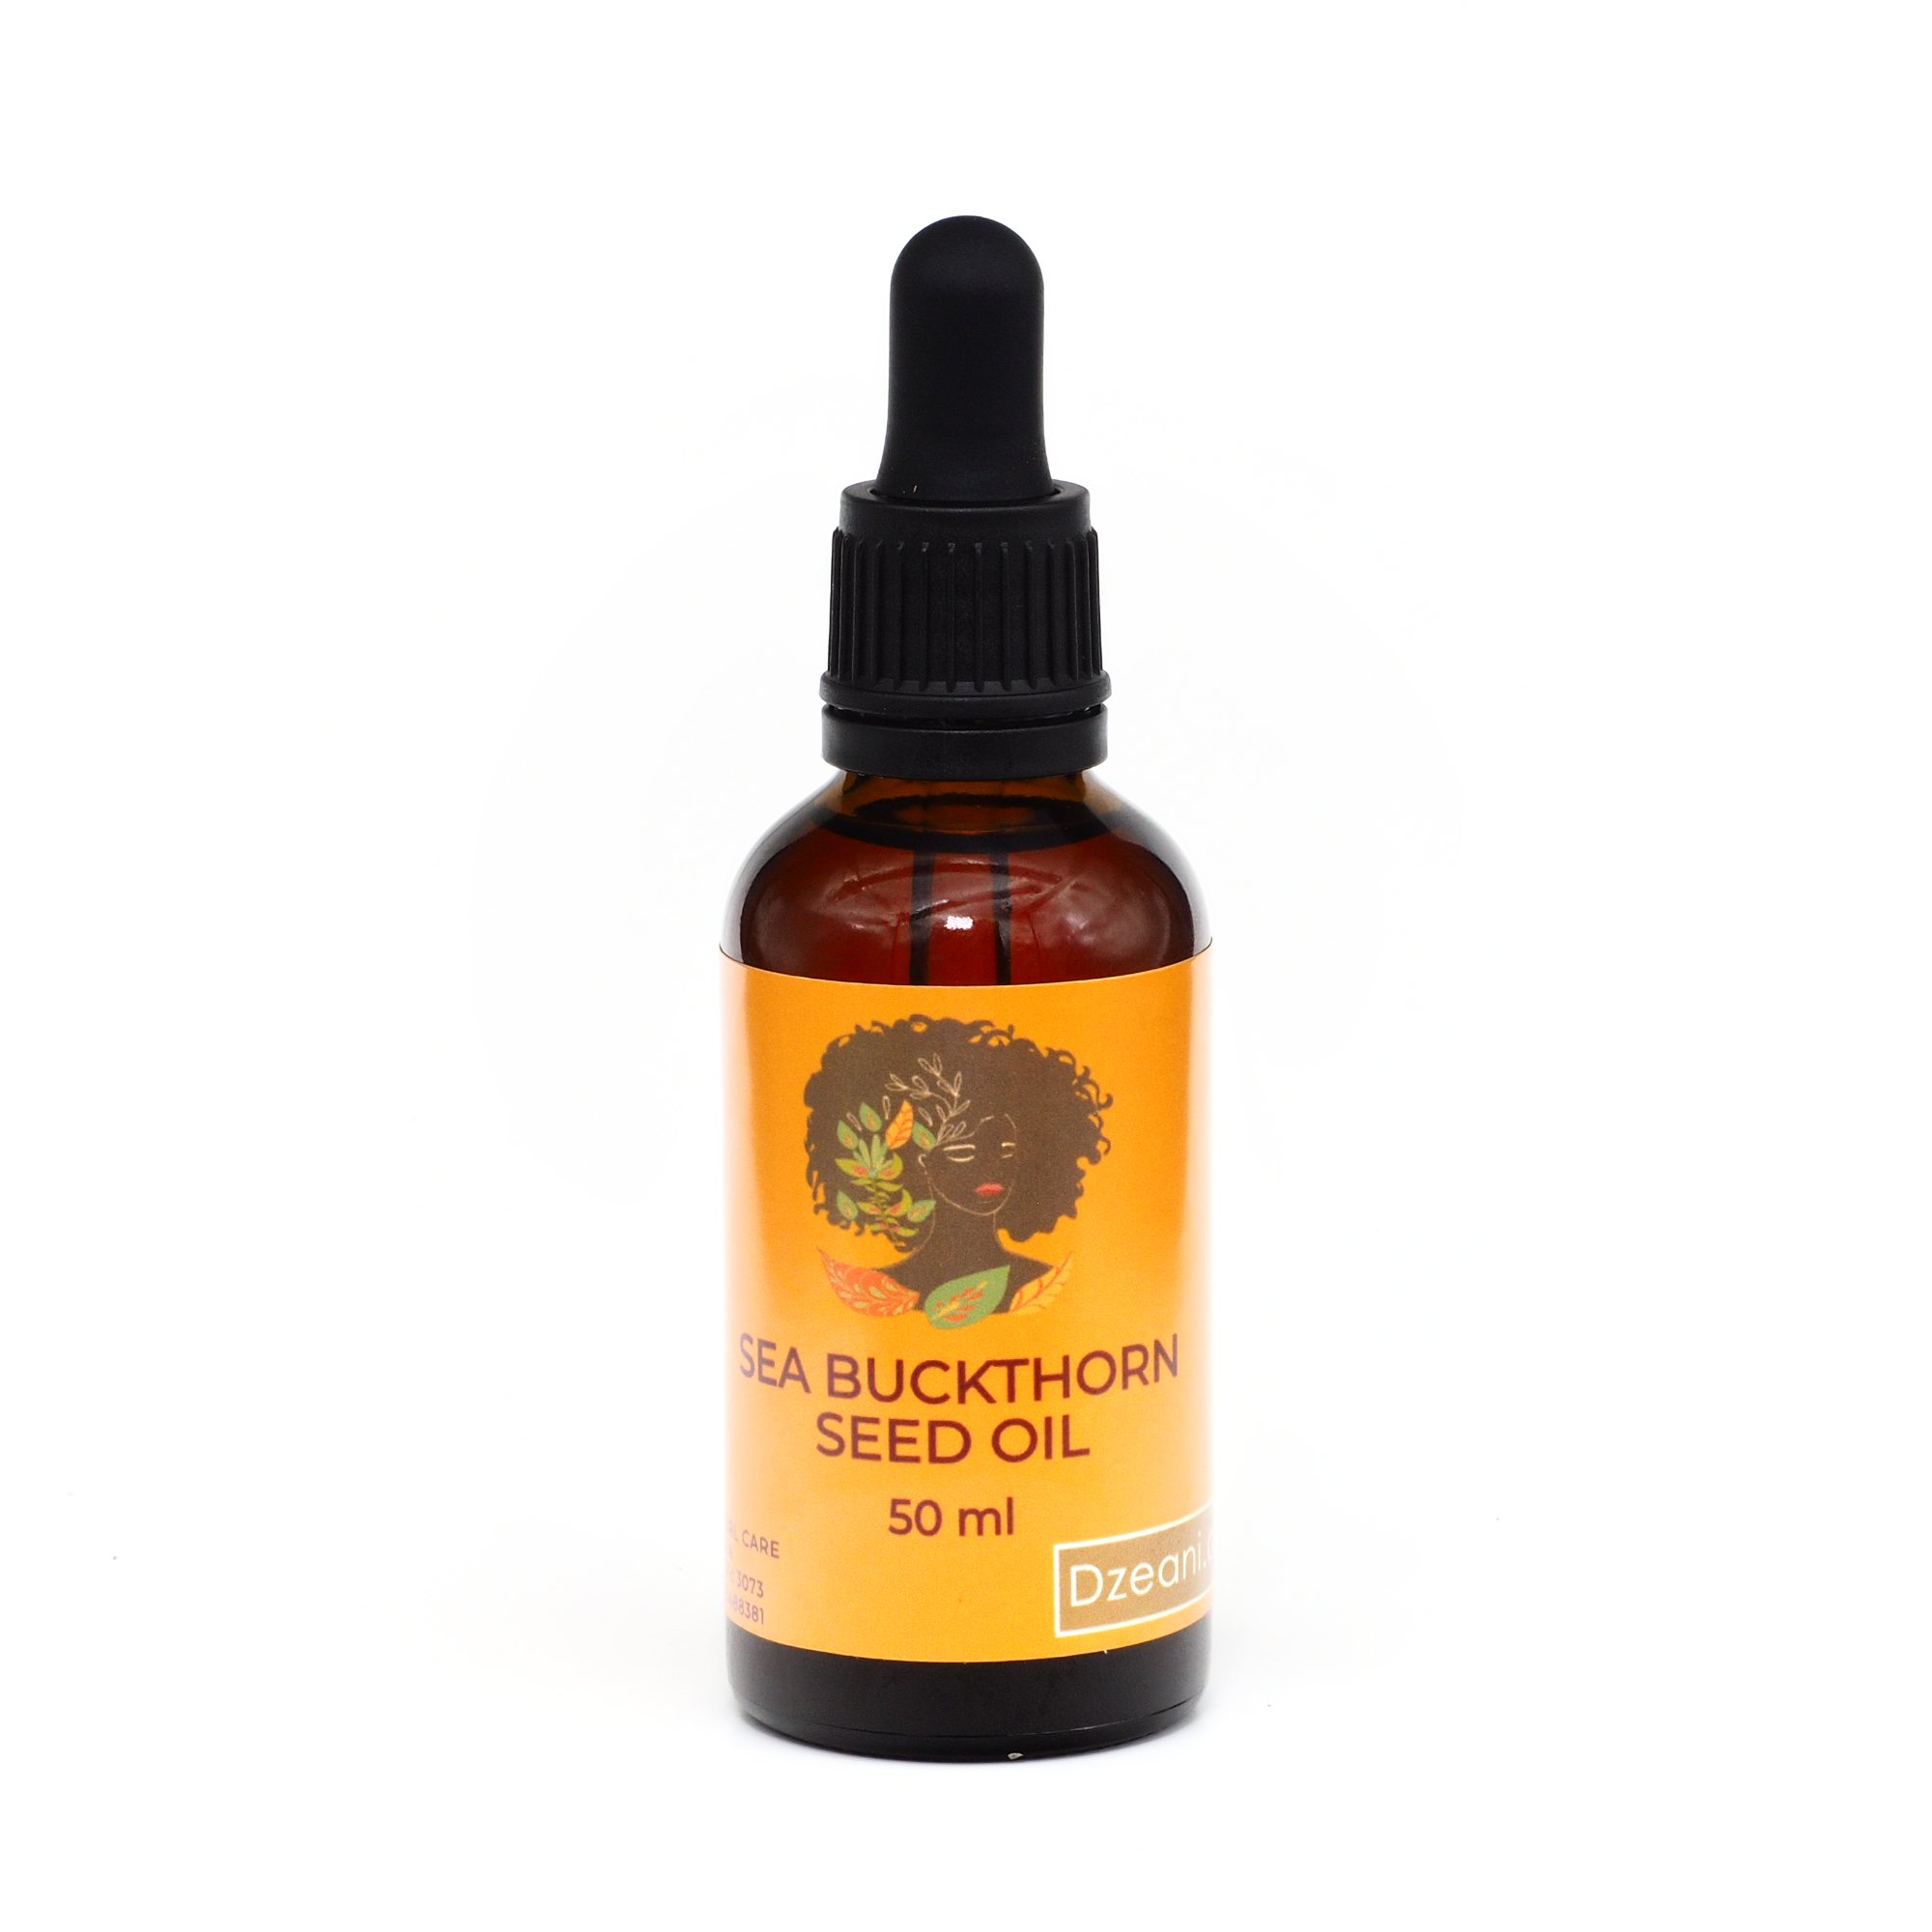 SEA BUCKTHORN SEED OIL 50ml from Dzeani (100% Pure Natural Oil)